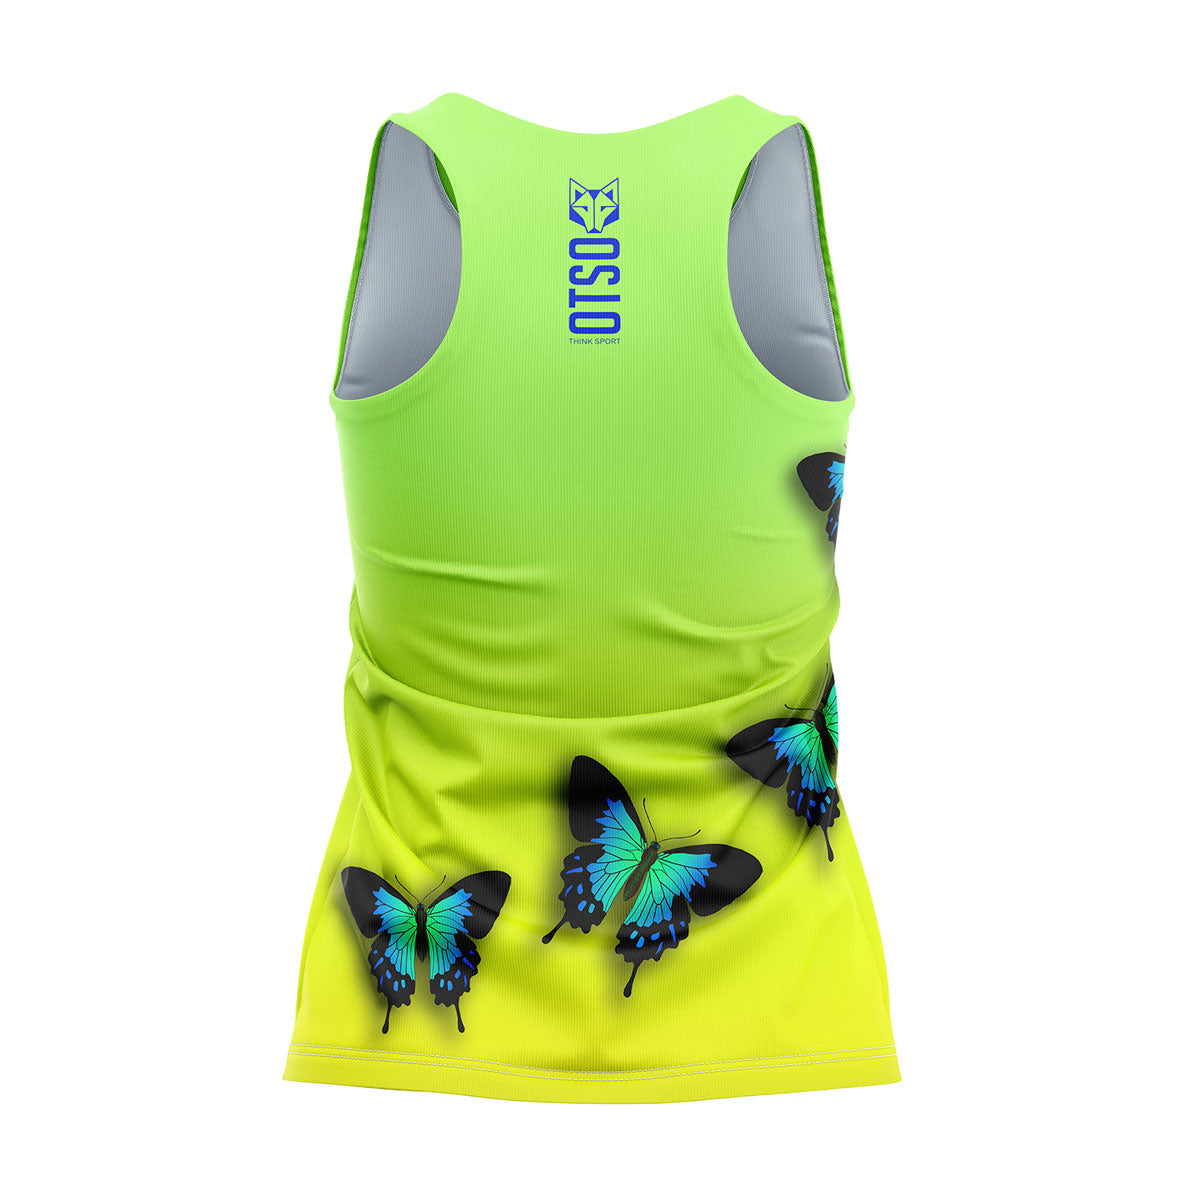 Camiseta sin mangas mujer - Butterfly